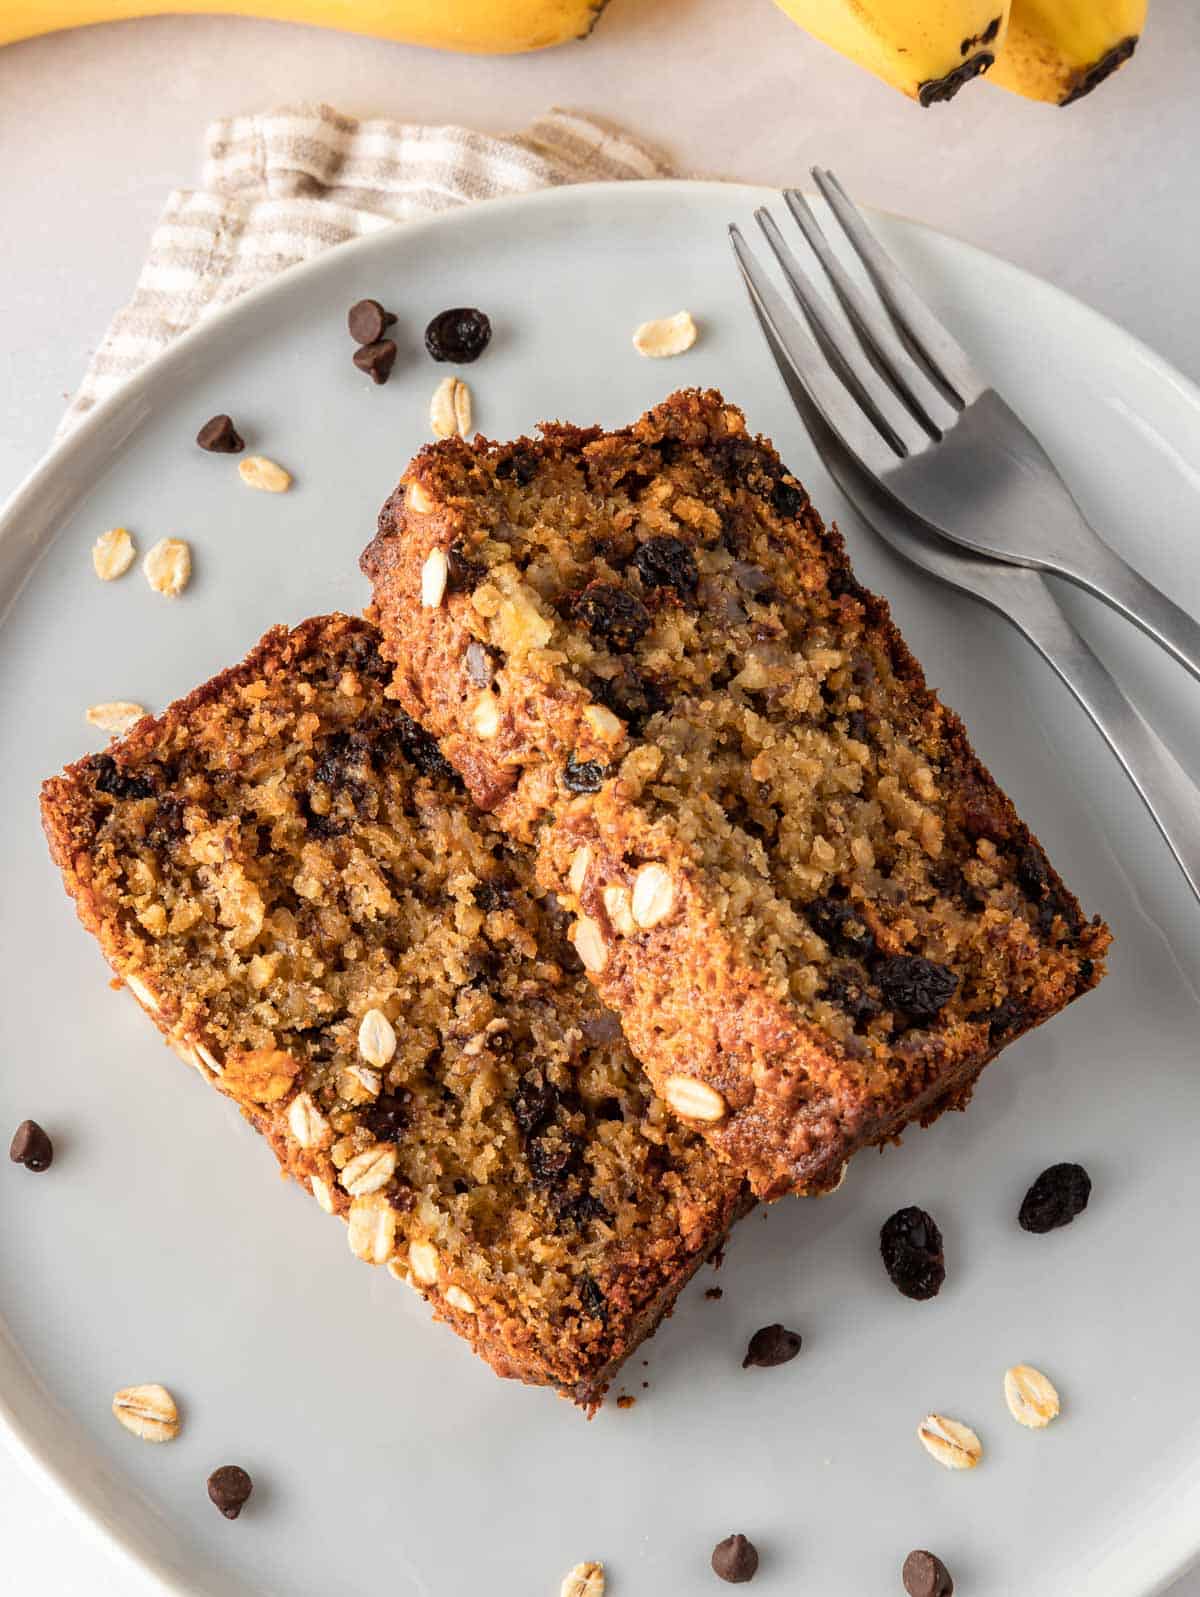 Two slices of banana bread with oats on a plate with two forks.